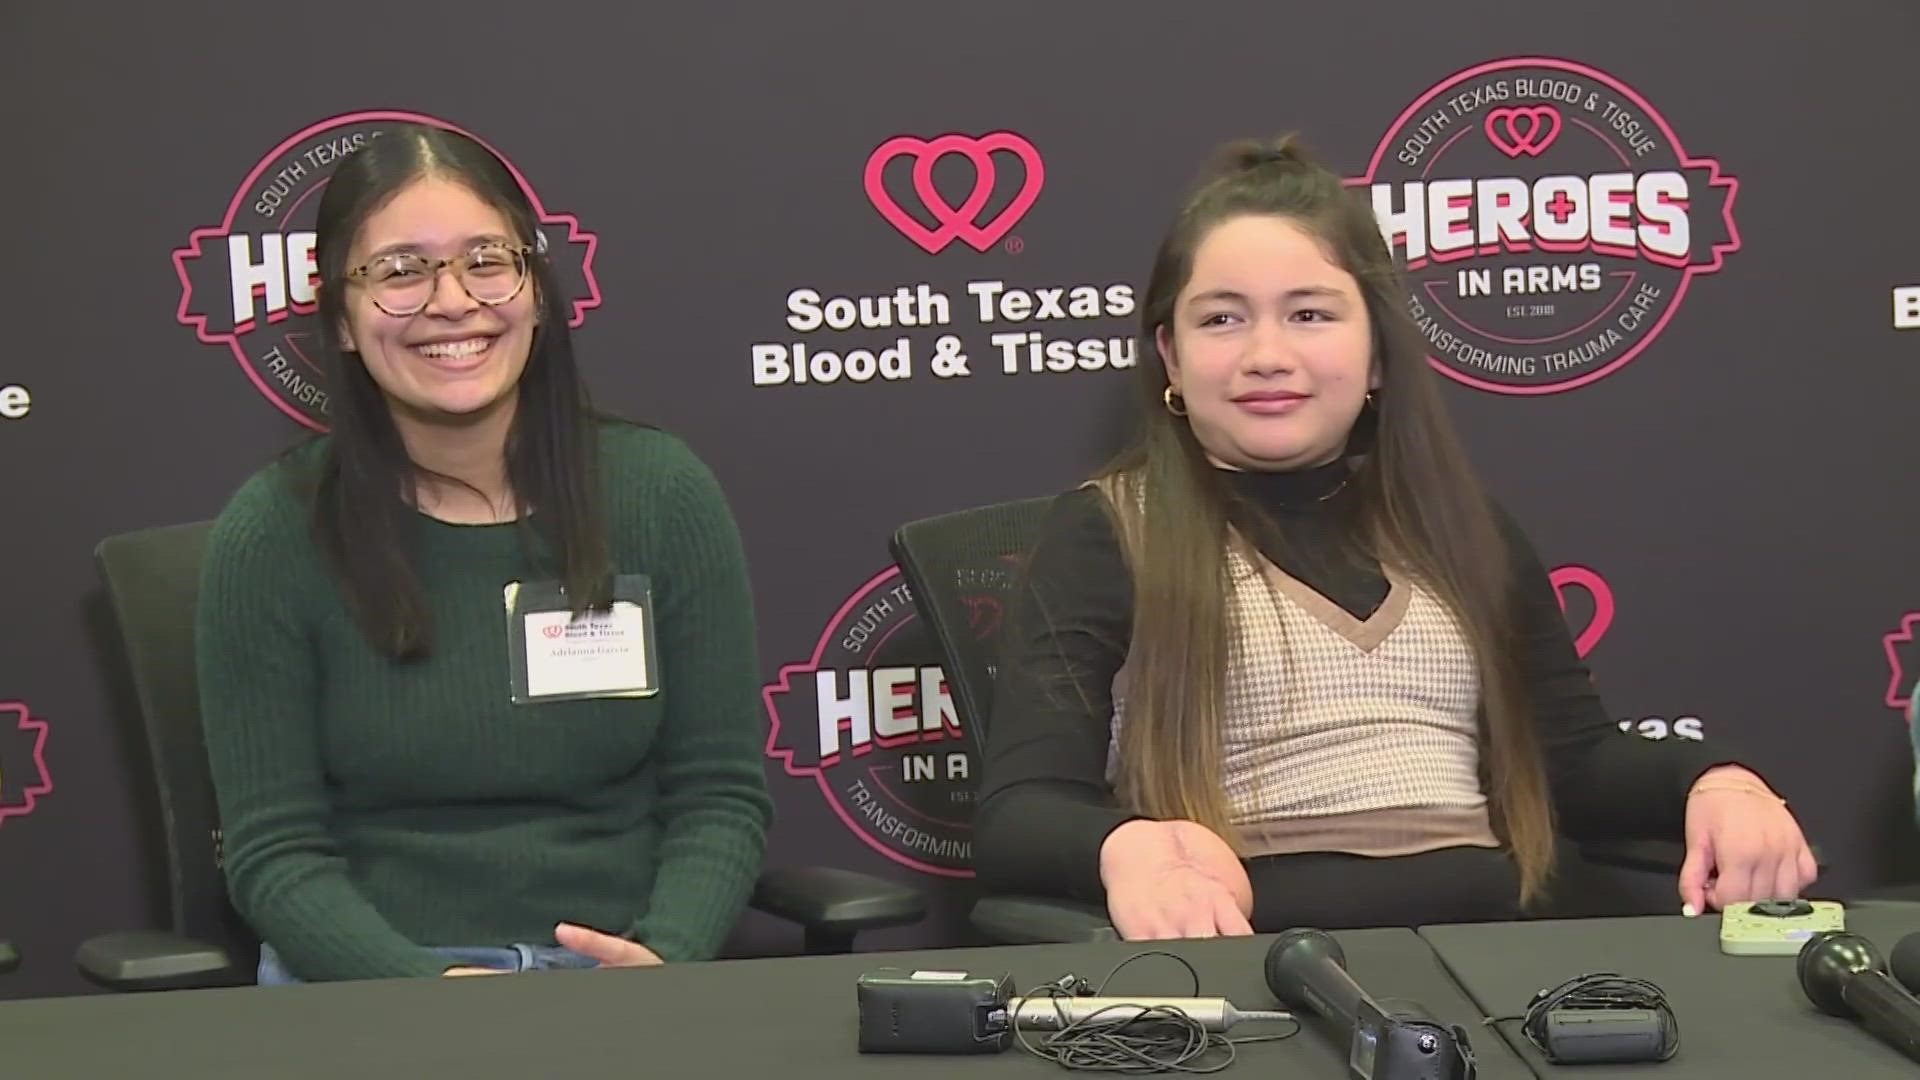 "Without the donors, I mean, we wouldn't have that blood to keep her stable."